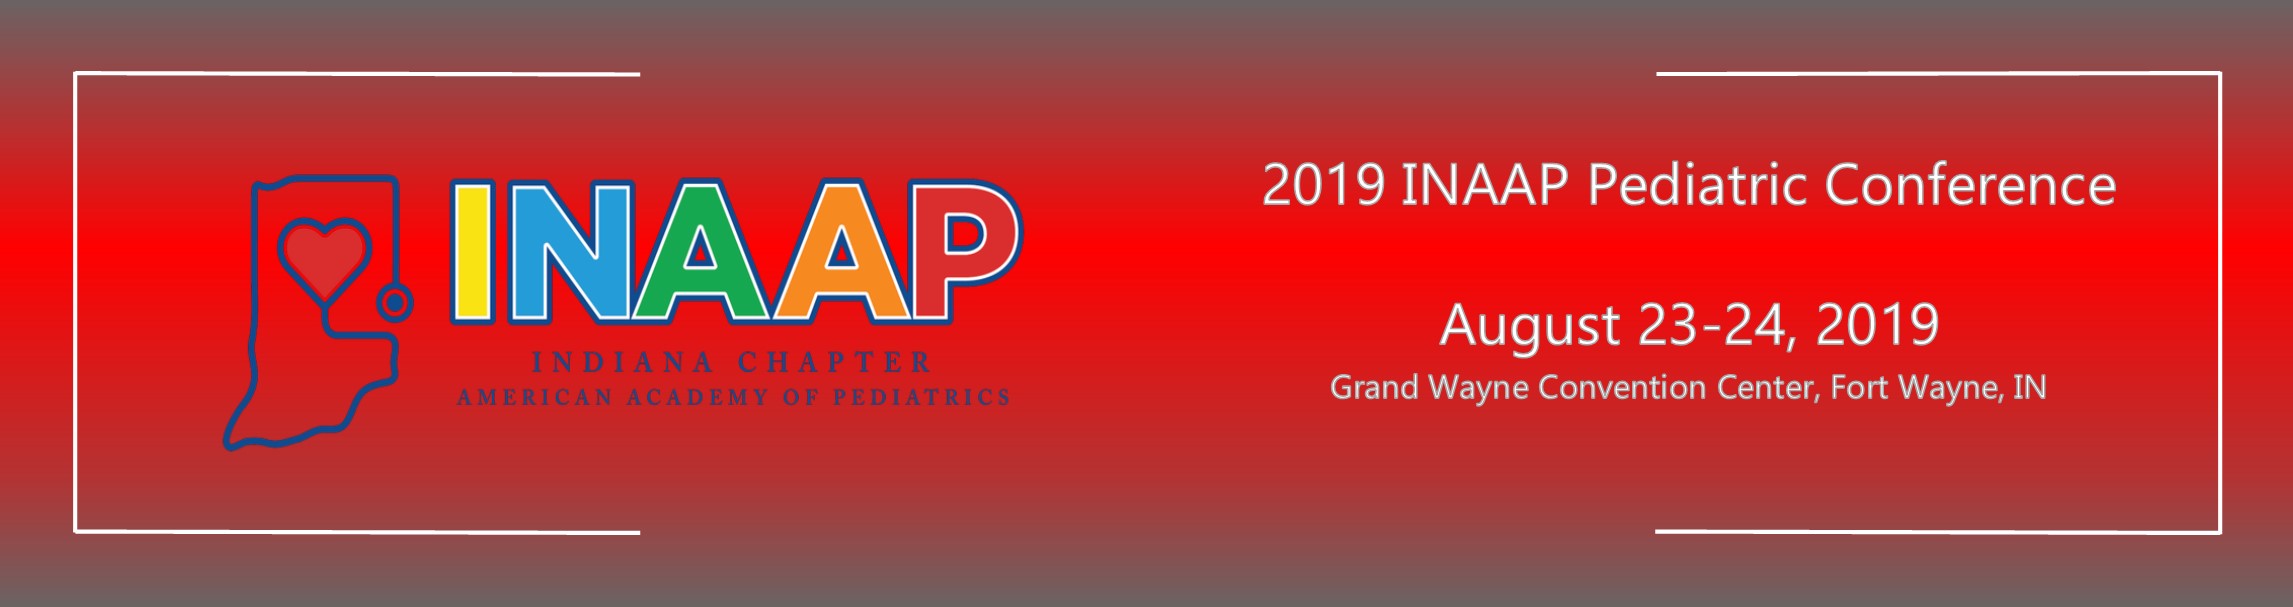 2019 INAAP Pediatric Conference Banner